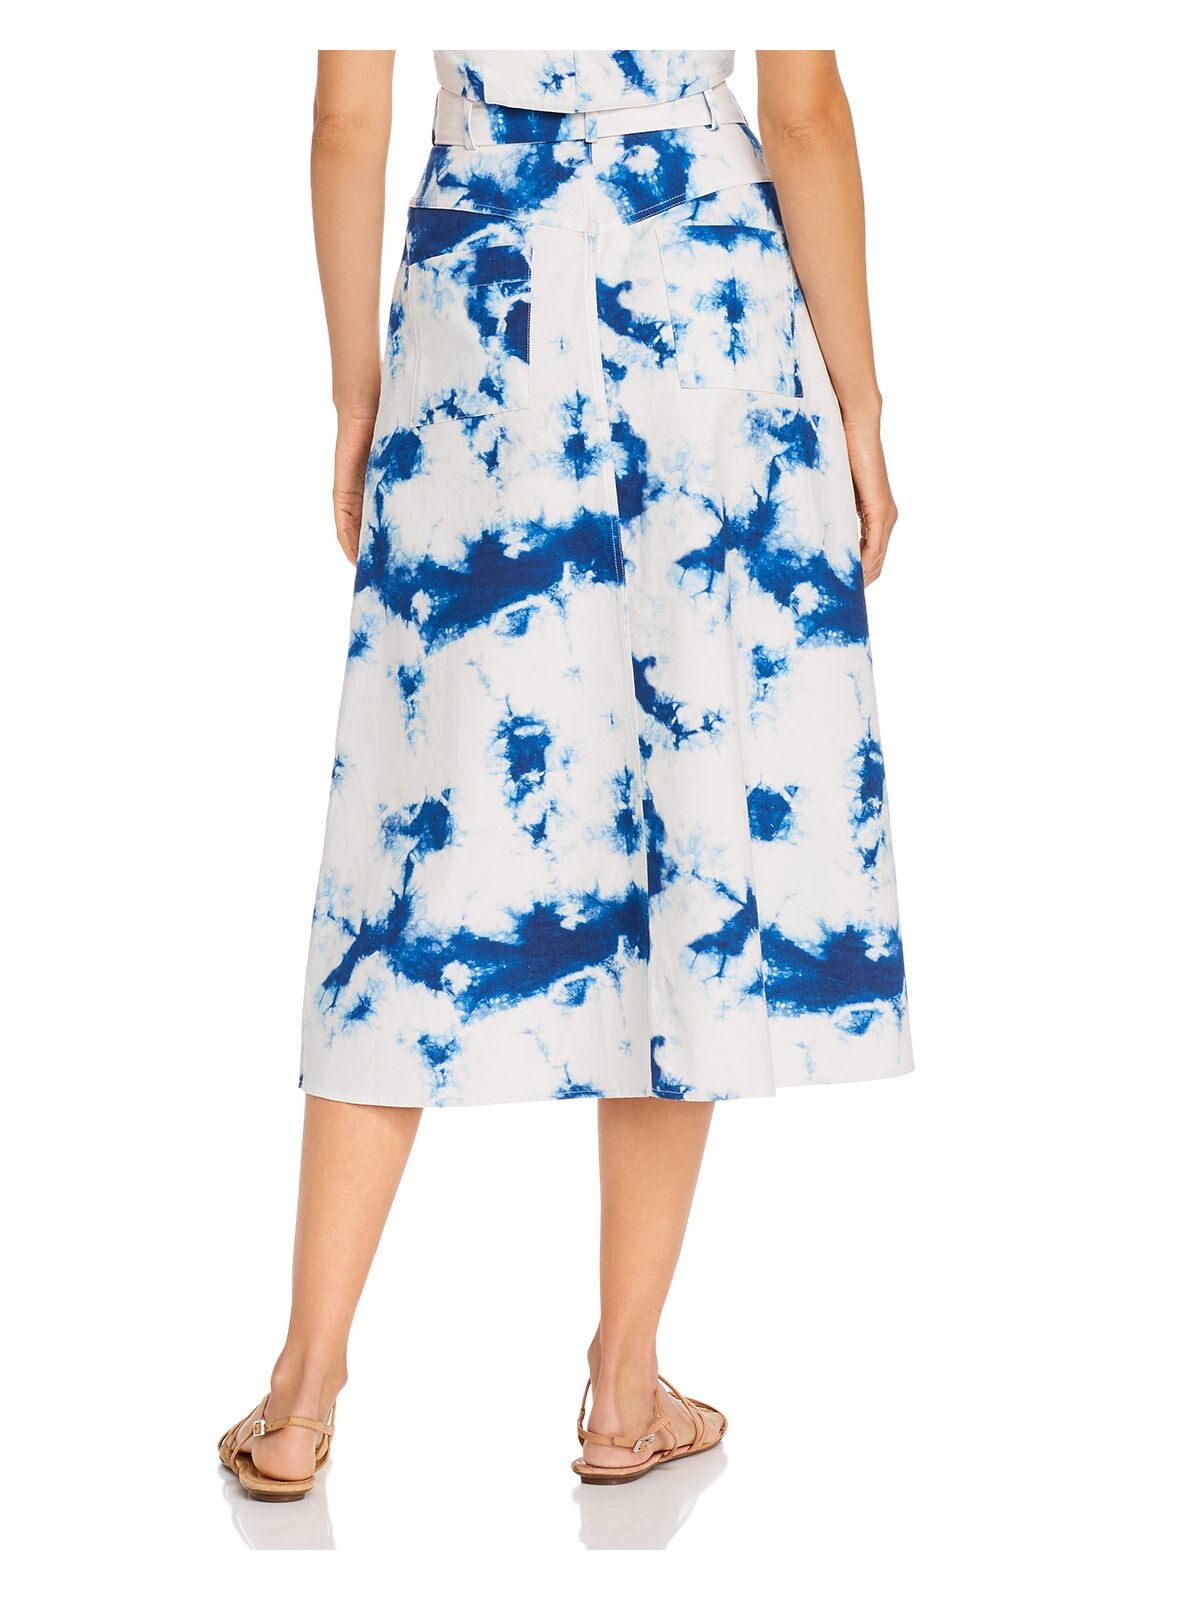 GARY BIGENI Womens Blue Belted Pocketed Tie Dye Midi A-Line Skirt Size: 2